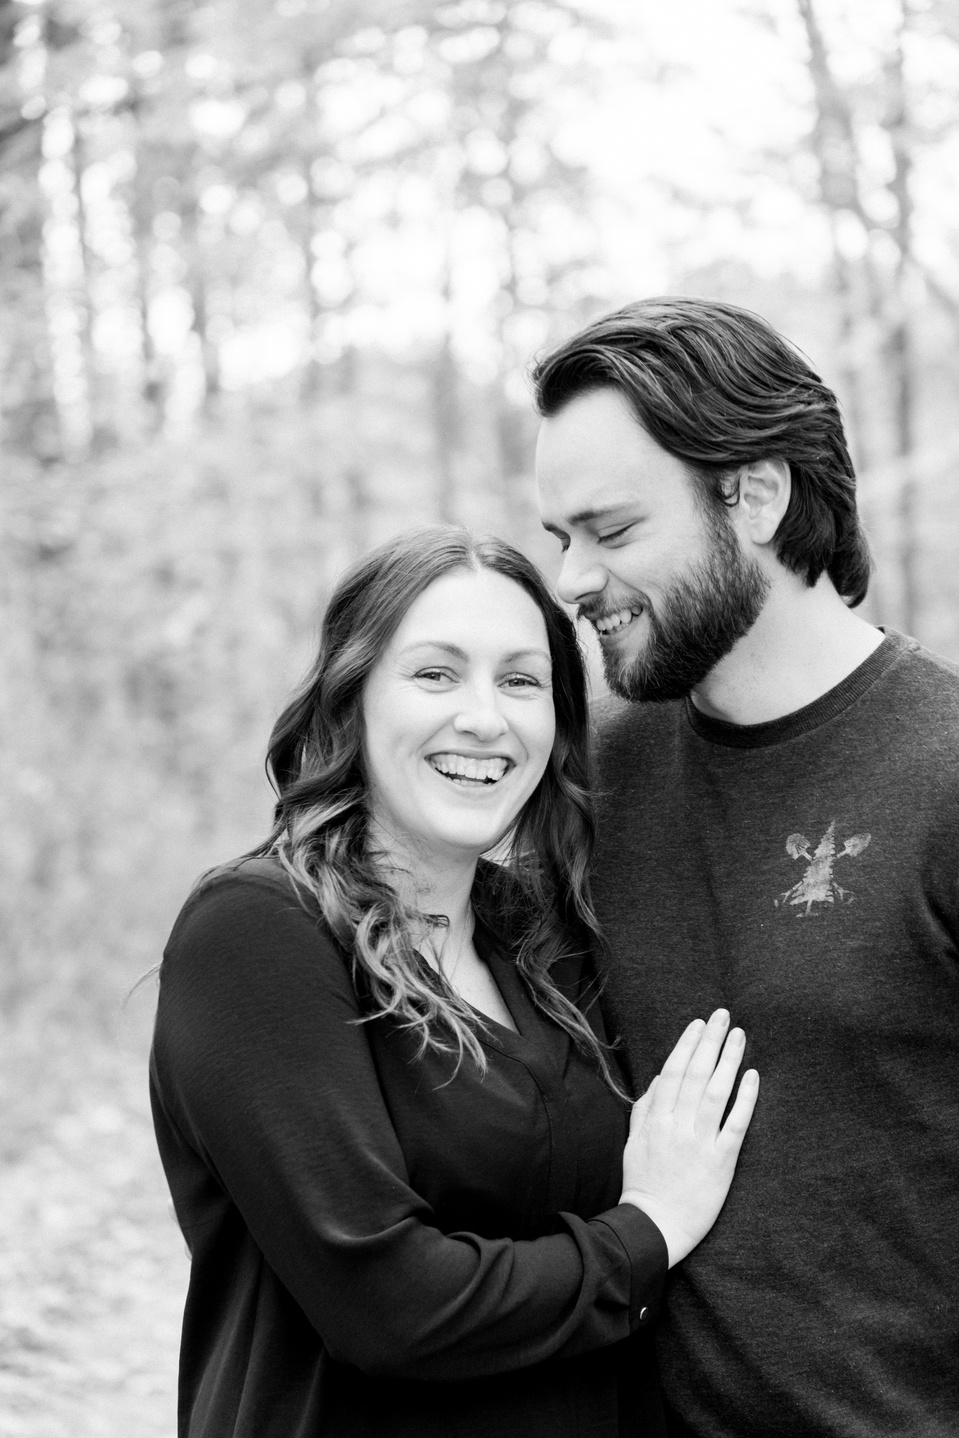 Black and white portrait of couple, man whispering secret to woman, woman looking into the camera, smiling. Niagara portrait photography, Niagara portrait photographer, Niagara family photography, Niagara family photographer.